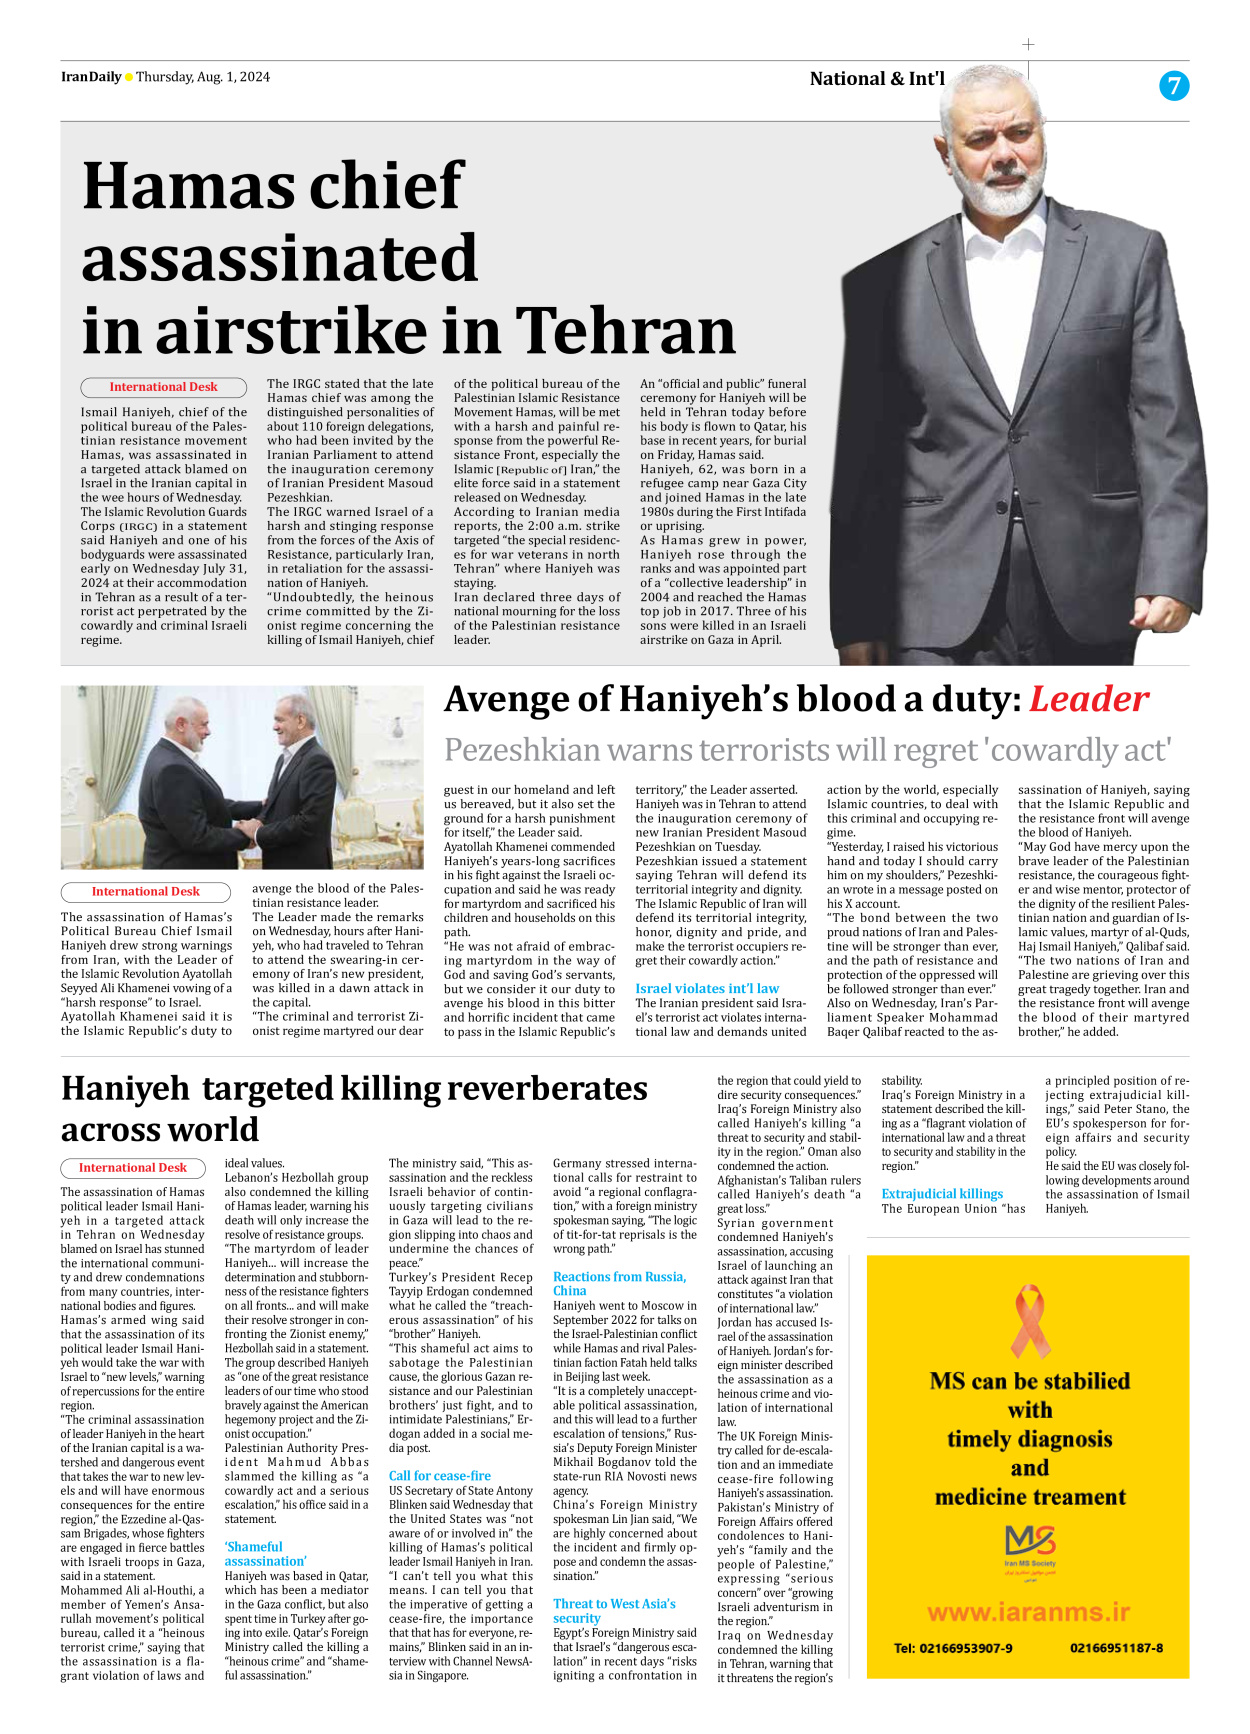 Iran Daily - Number Seven Thousand Six Hundred and Seventeen - 01 August 2024 - Page 7